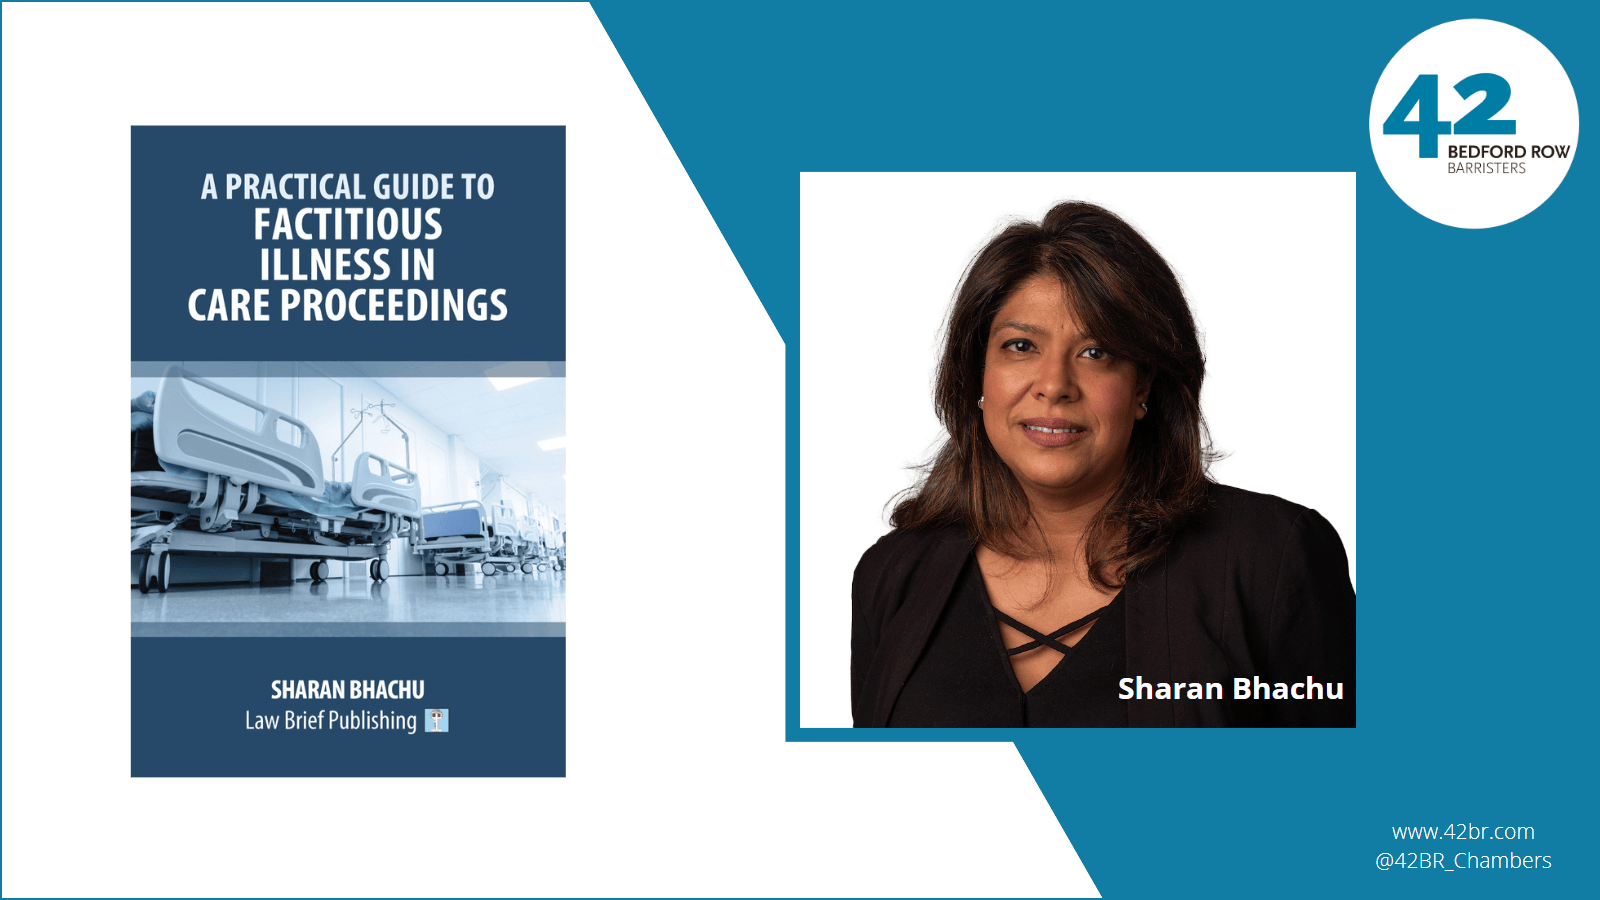 A practical guide to factitious illness in care proceedings by Sharan Bhachu